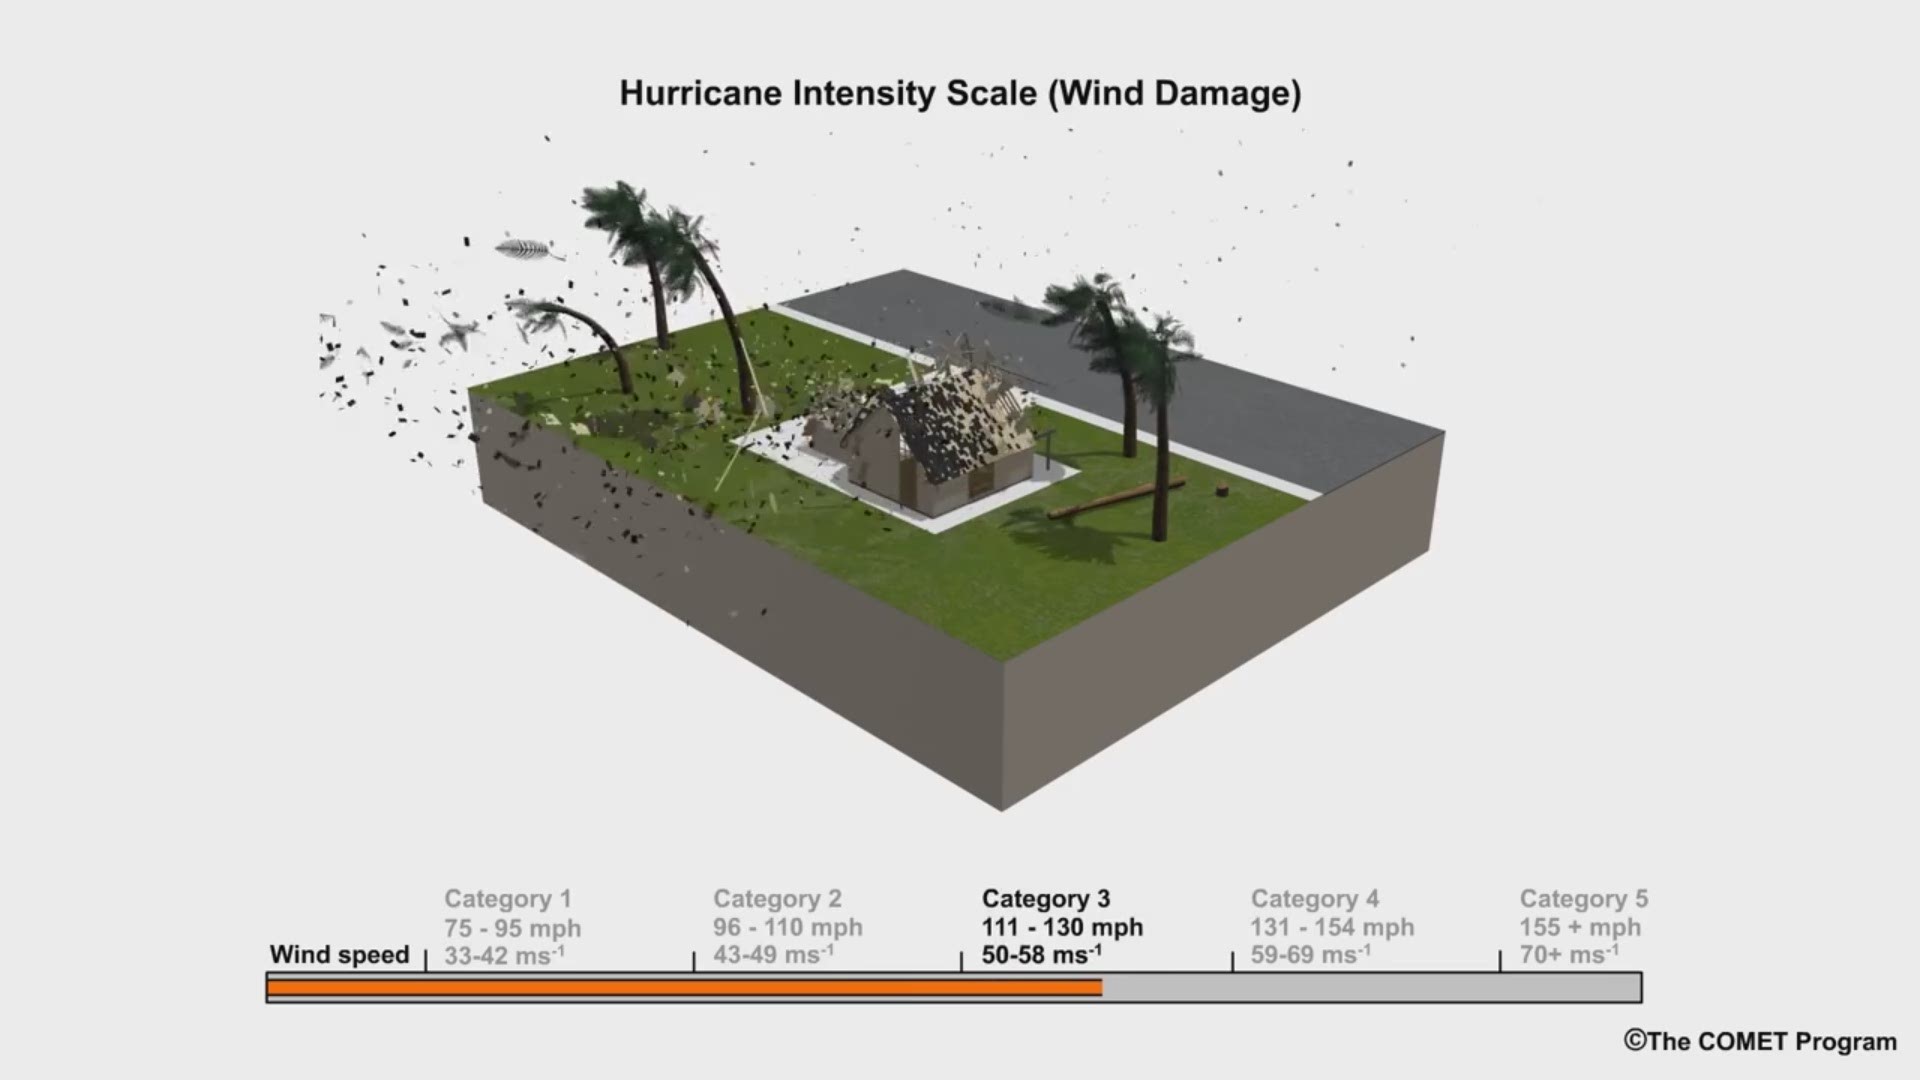 Divided into five categories, the scale designates each hurricane based on its sustained wind speed and estimates what kind of property damage could occur. Courtesy: The COMET Program